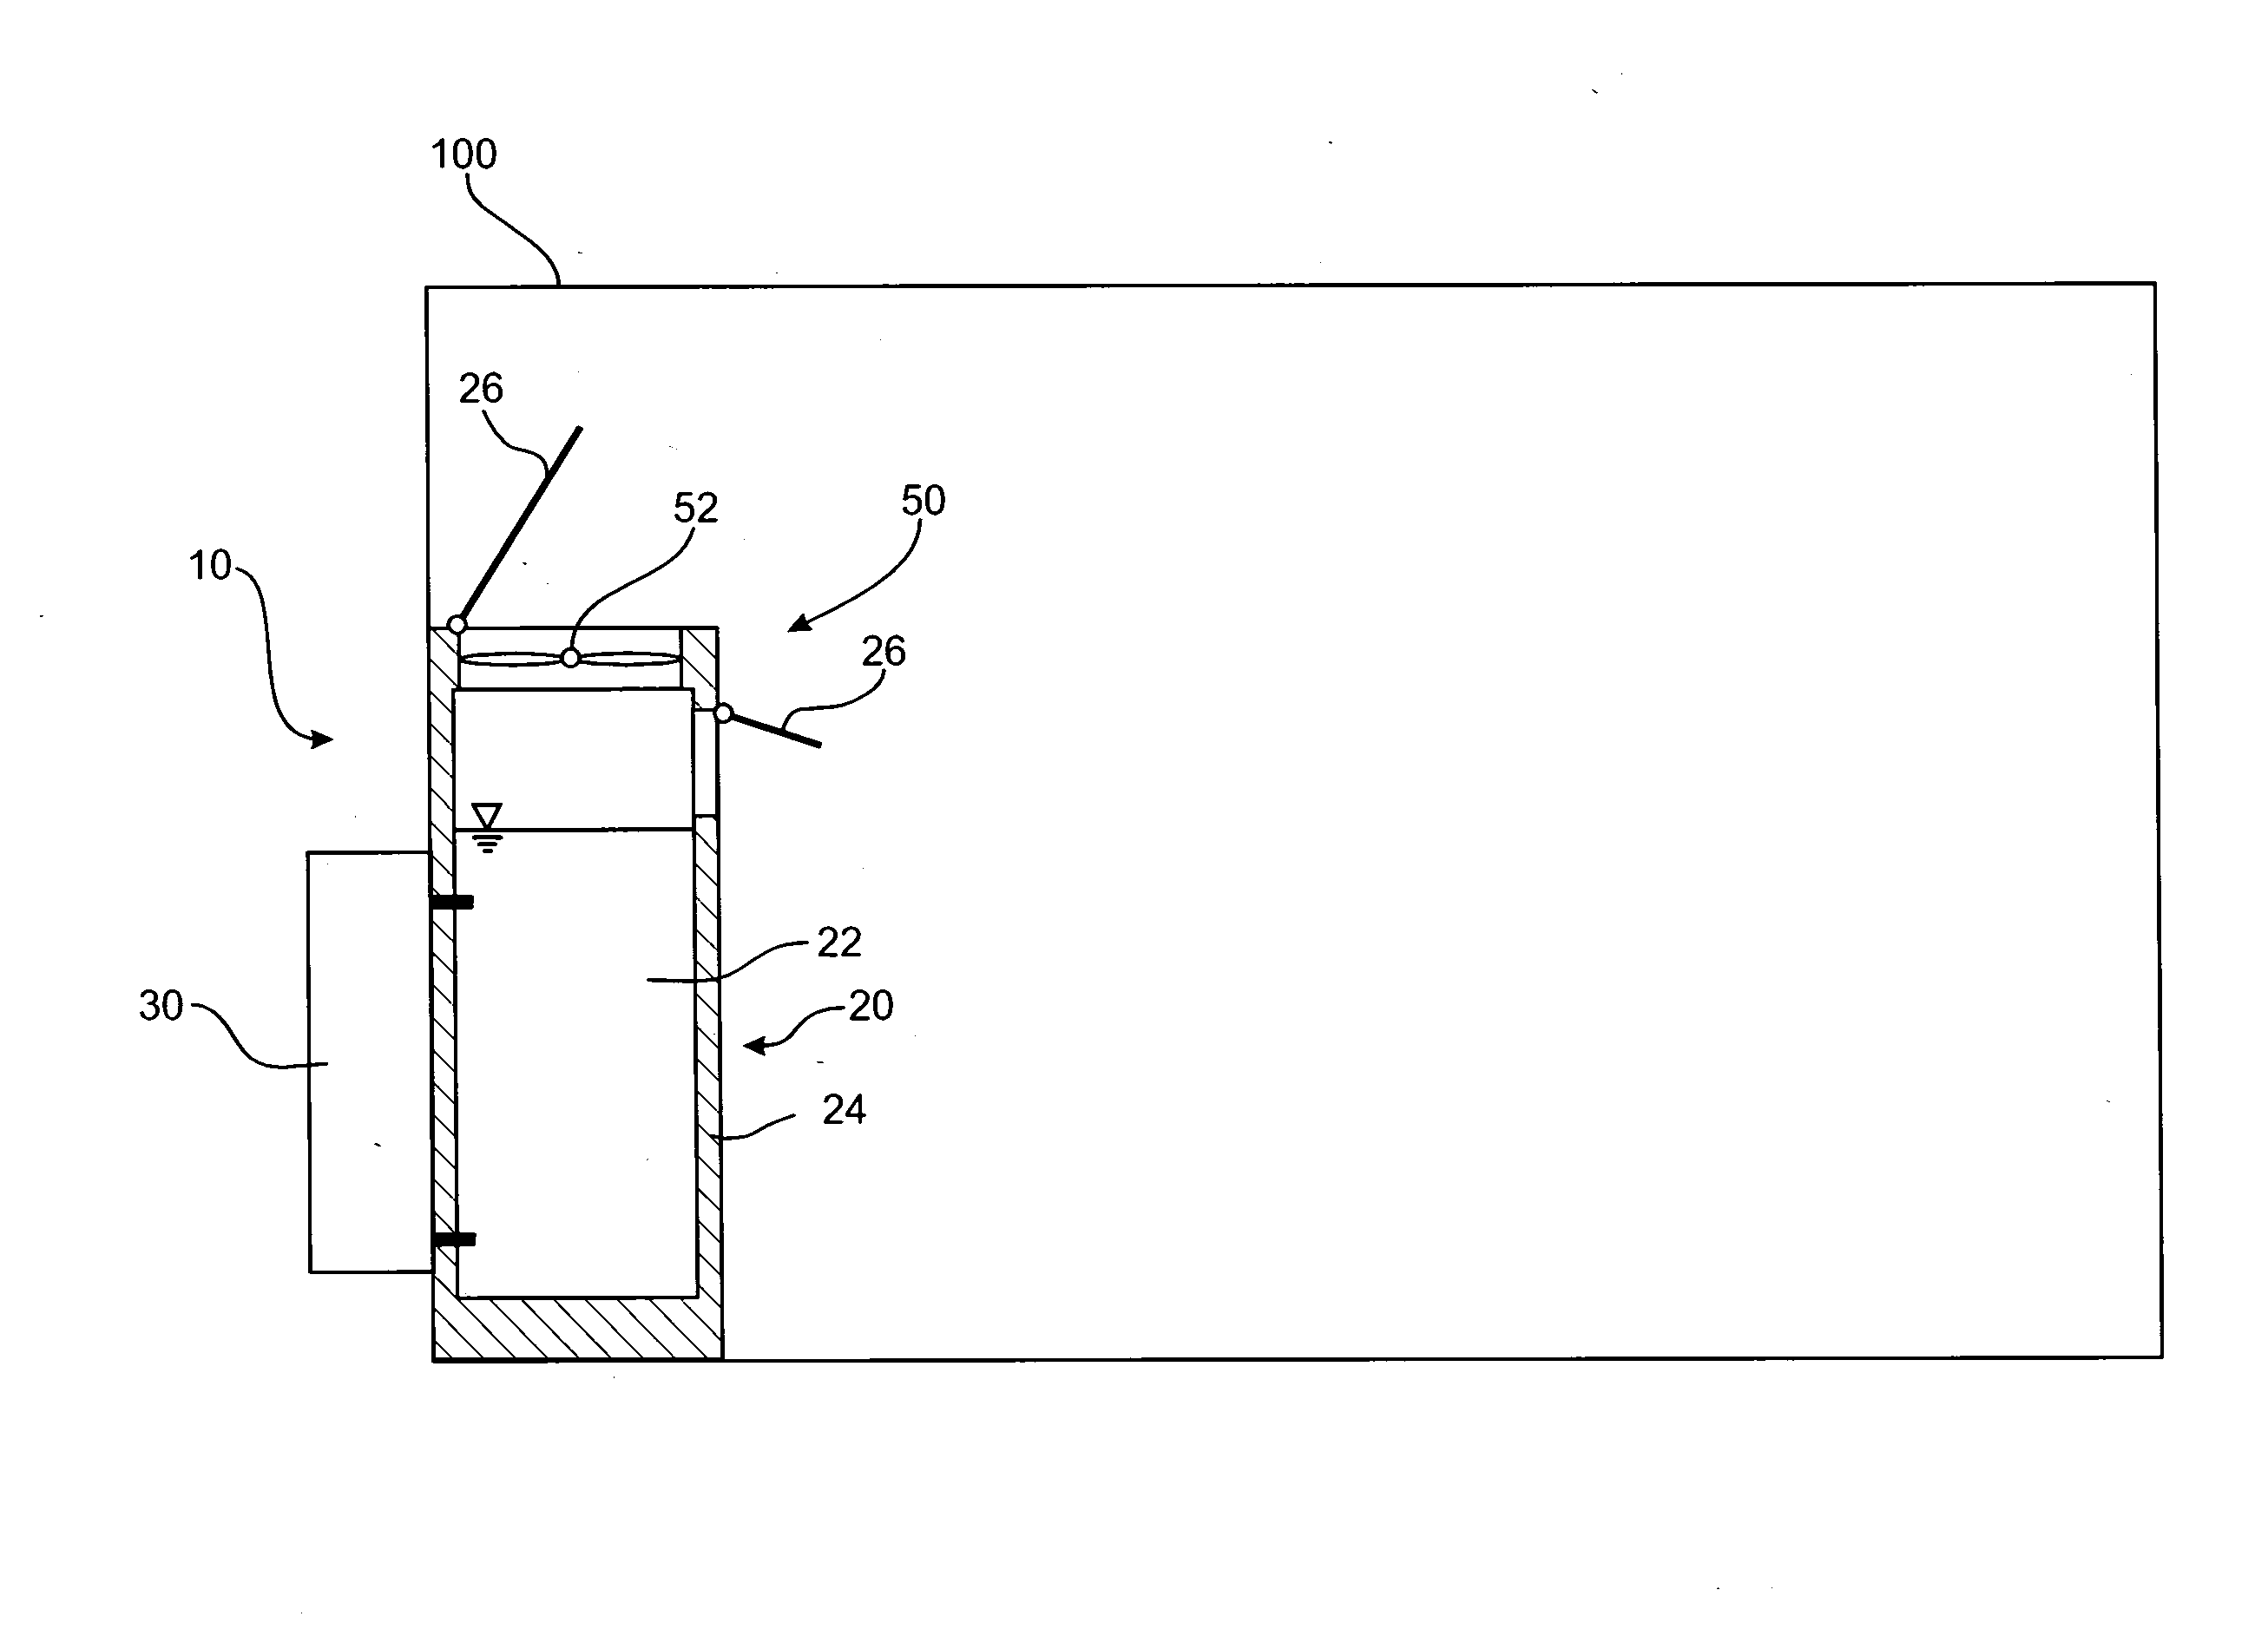 Method for cooling a refuge chamber in an emergency situation